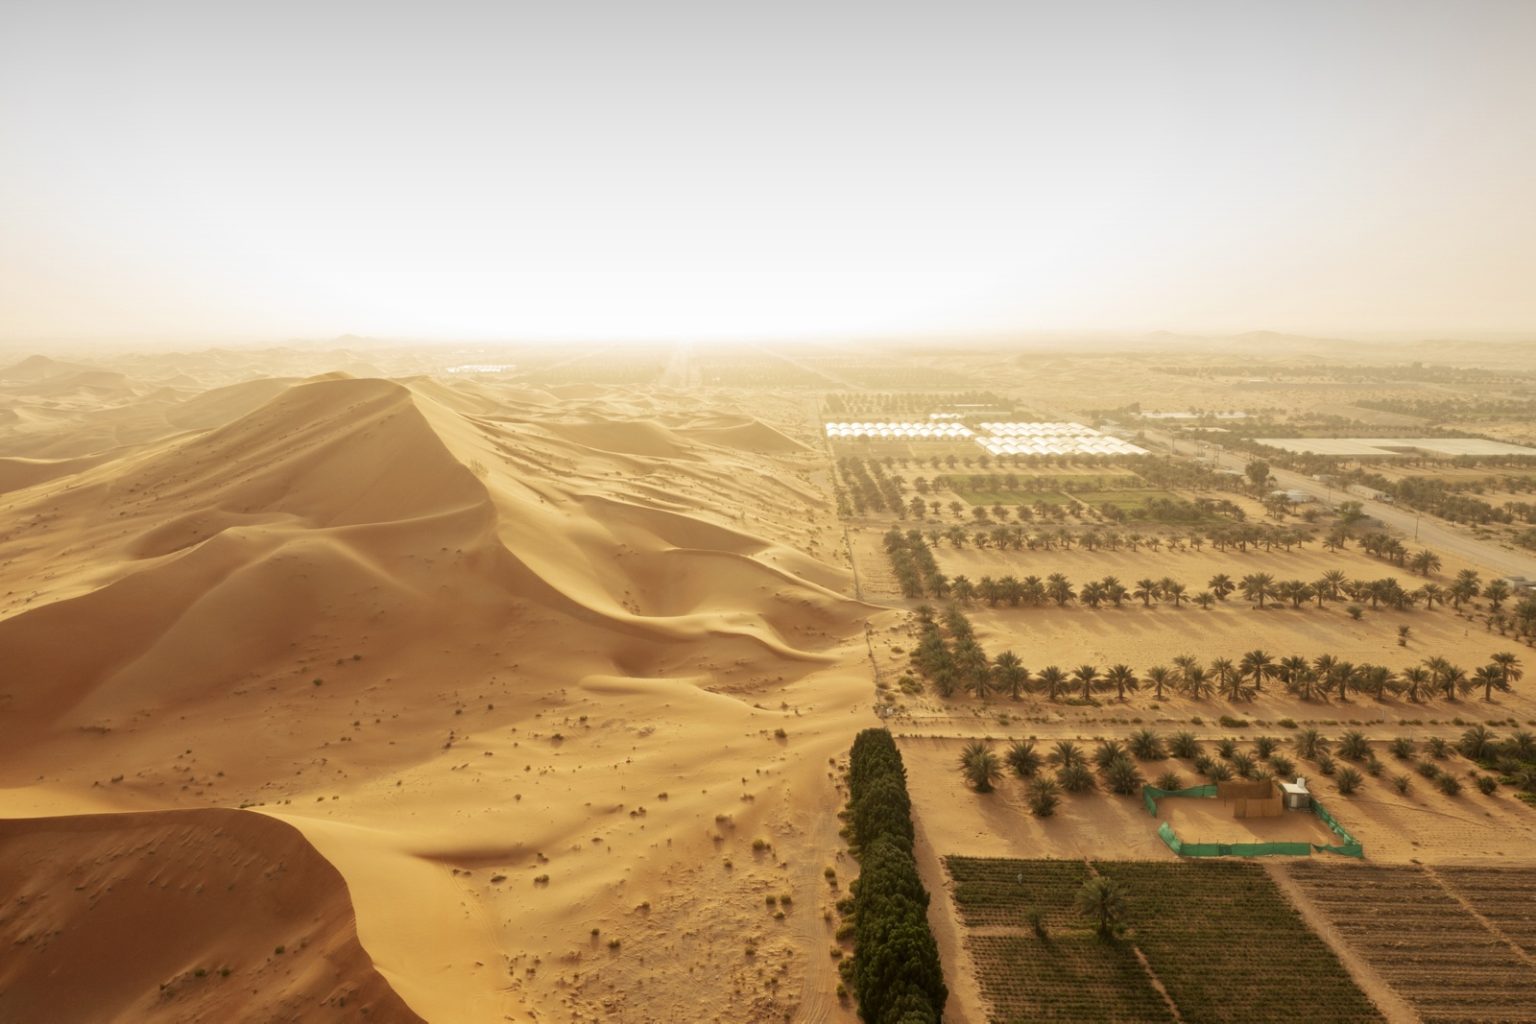 UAE, Green Dunes, 2022.
This series shows rectangular date palm plantations, one of the only crops that will grow with the salty groundwater and arid soil. On Abduls farm its a different story. His farm, in the shadow of a leviathan sand dune, grows quinoa, alfalfa and even courgette using a novel circular system he learned at the biosaline centre. The low-tech process means that food for UAE grows, even in the deep desert.  

Emirati Arabi Uniti, Dune verdi, 2022.
Questa serie mostra piantagioni rettangolari di palme da dattero, una delle uniche colture in grado di crescere con le acque sotterranee salate e il terreno arido. Nella fattoria di Abdul la storia è diversa. Nella sua fattoria, all'ombra di una duna di sabbia leviatana, si coltivano quinoa, erba medica e persino zucchine, utilizzando un innovativo sistema circolare appreso al centro biosaline. Il processo a bassa tecnologia significa che il cibo per gli Emirati Arabi Uniti cresce, anche nel profondo deserto.